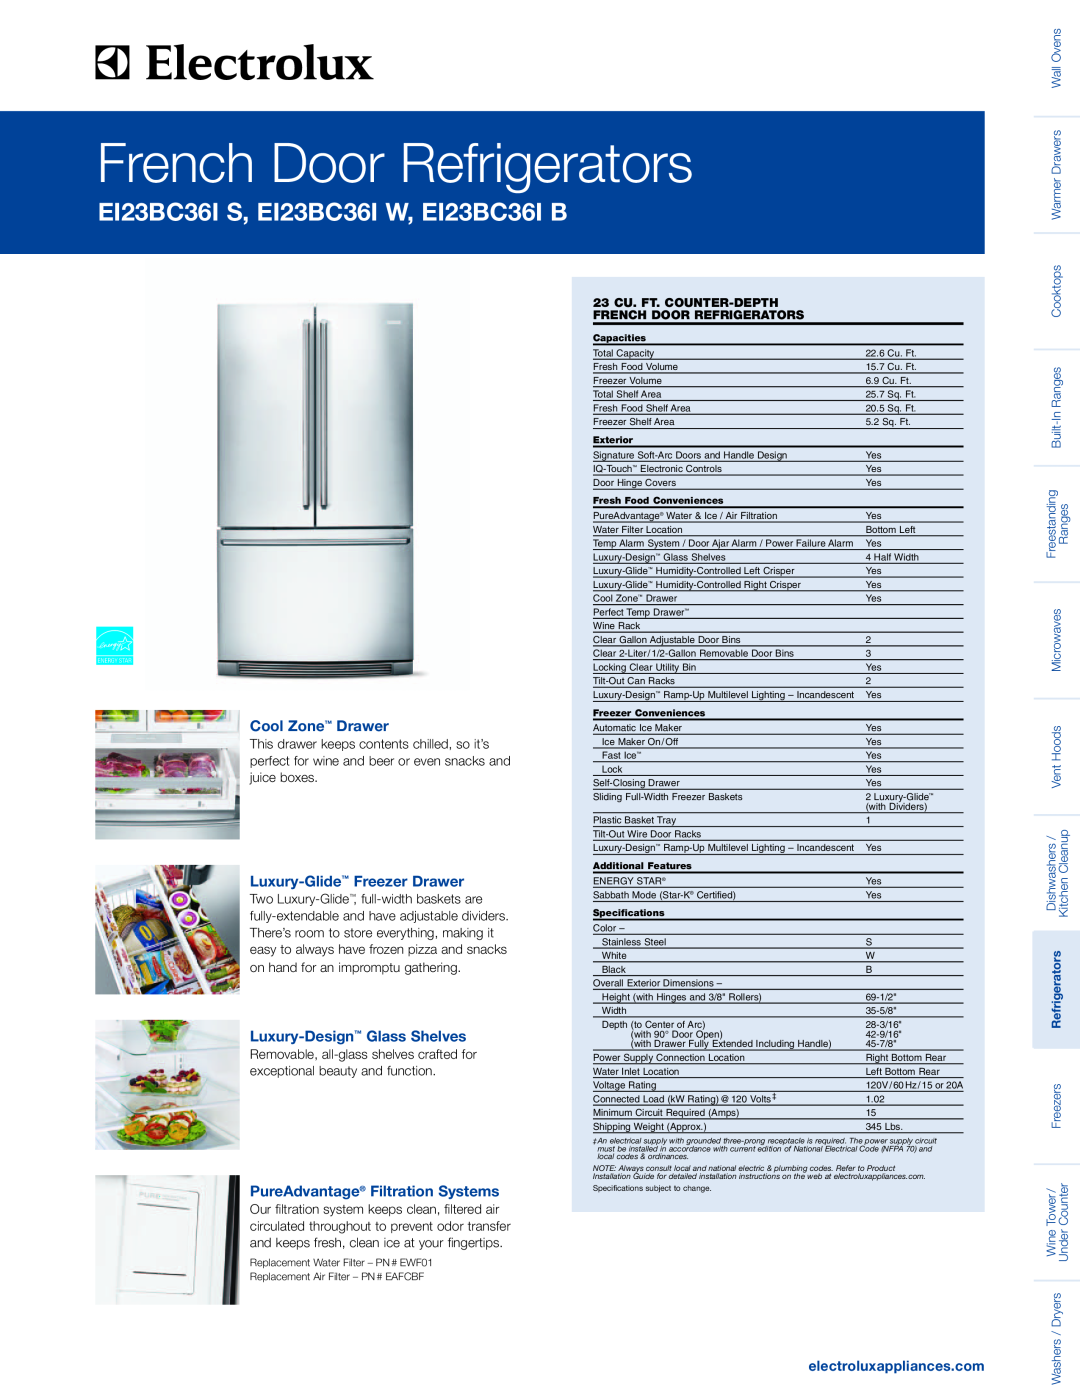 Electrolux EI23BC36IB specifications Cool Zone Drawer, Luxury-Glide Freezer Drawer, Luxury-Design Glass Shelves 